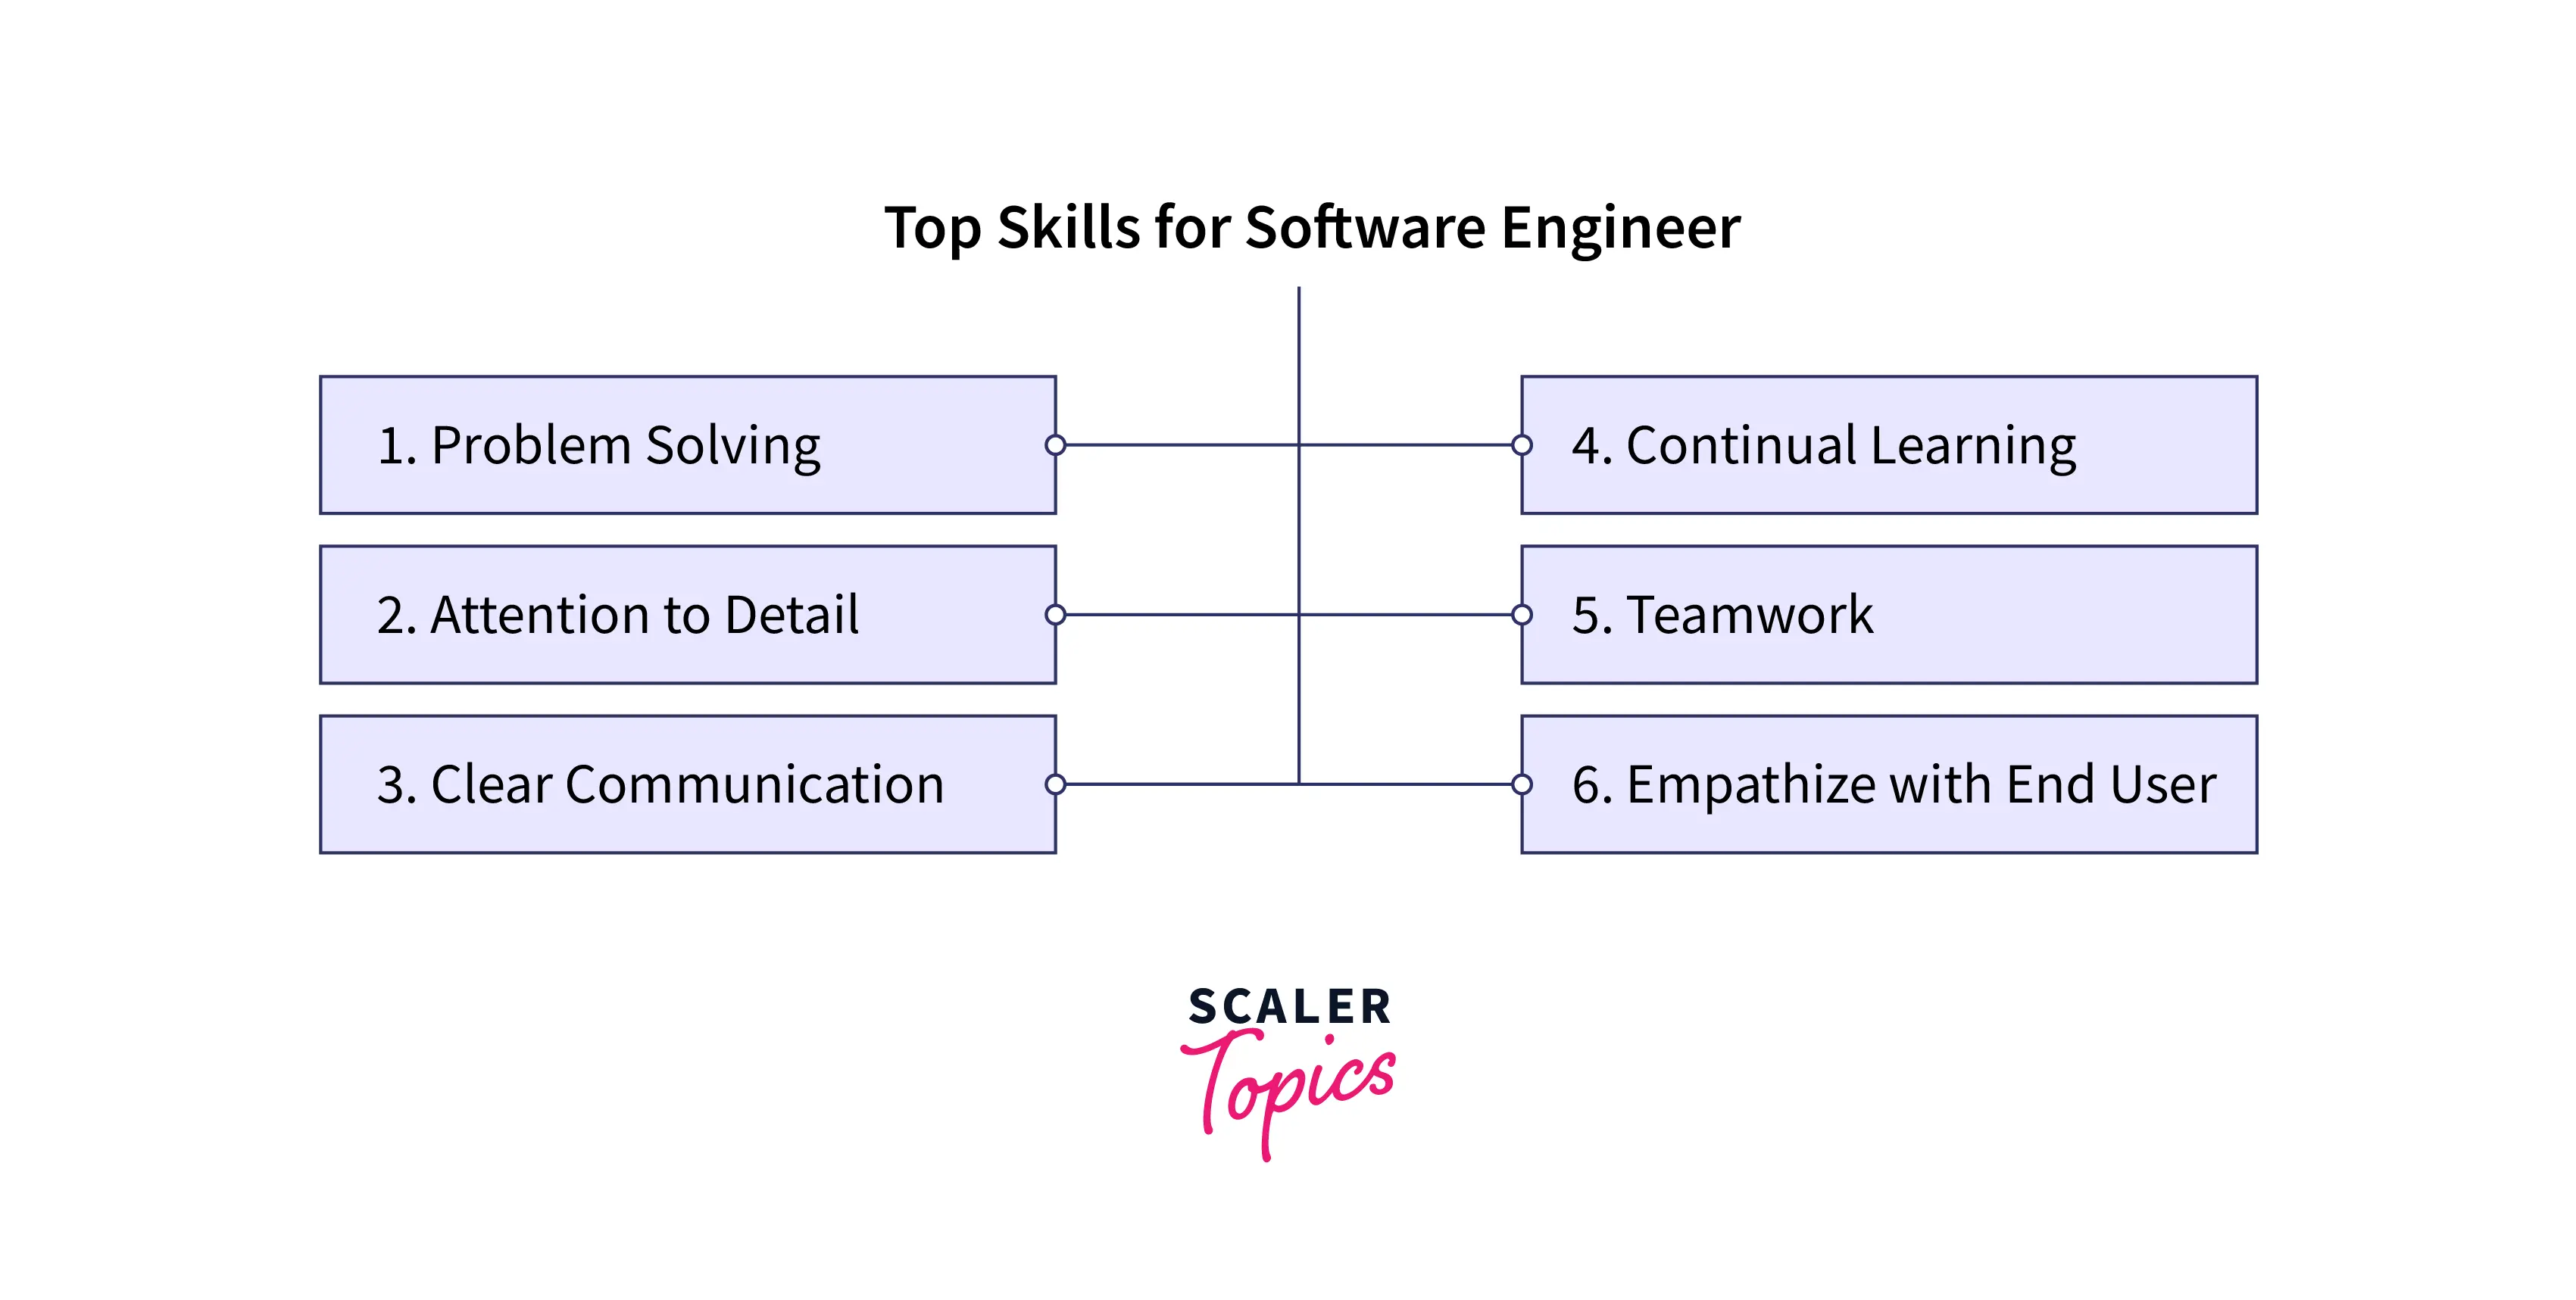 Top skills for software engineer